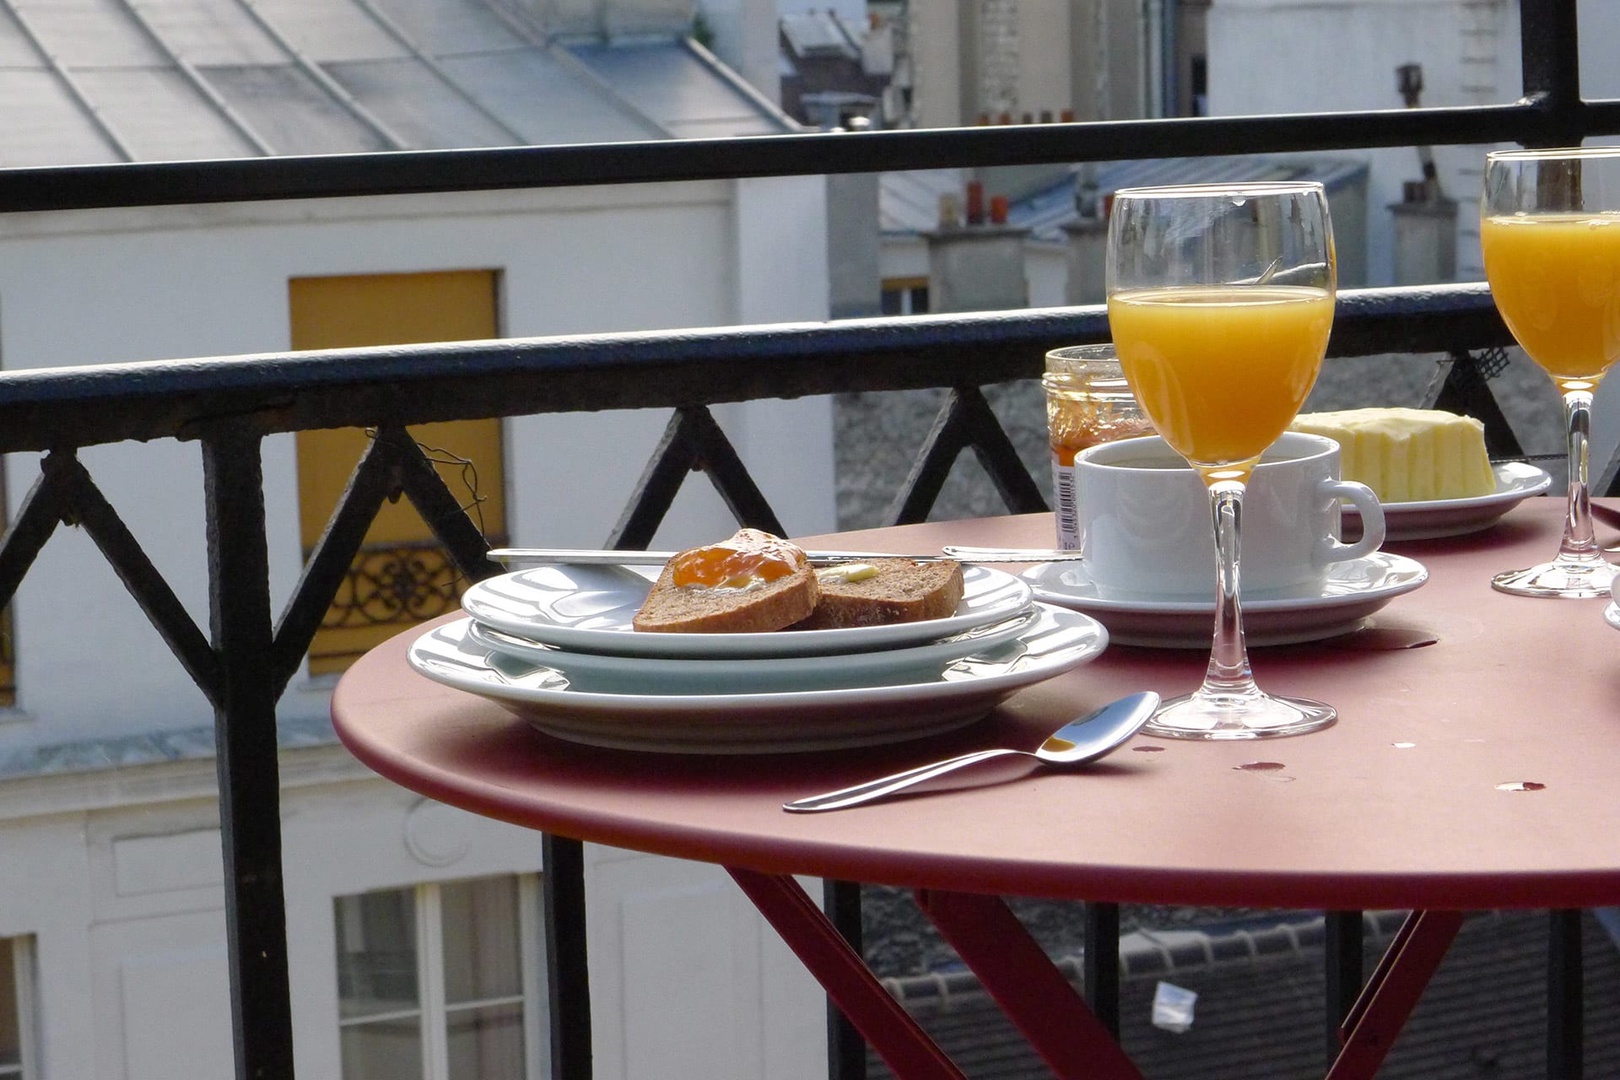 The balcony is the perfect spot for breakfast!